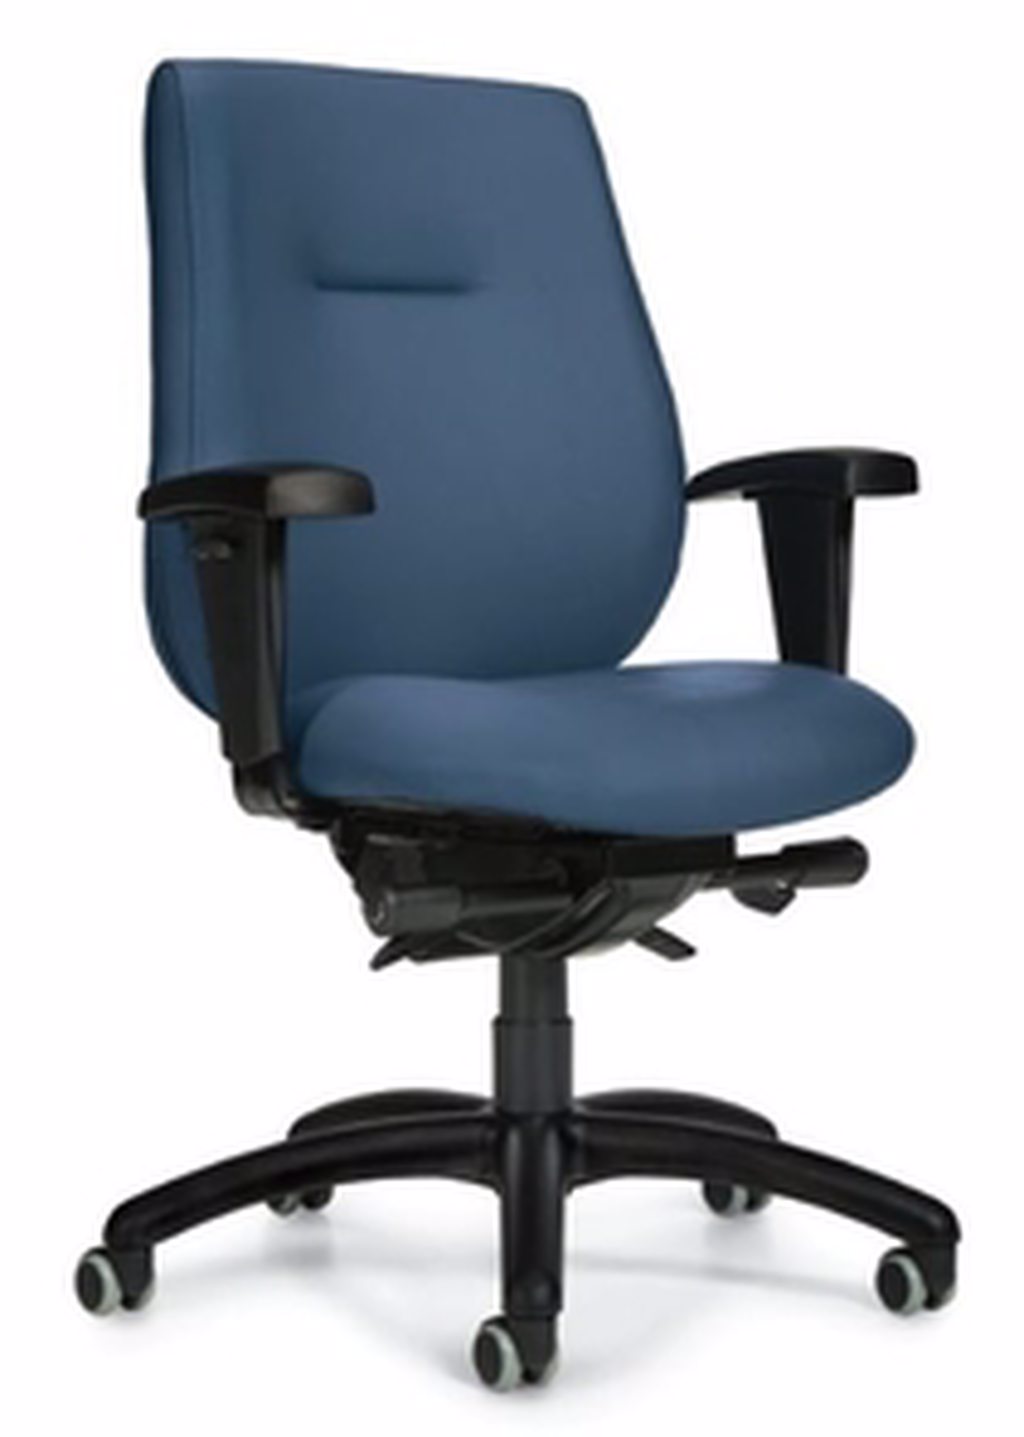 This piece office furniture features a pull over upholstery cover along with a sealed and finished seat pan for easy housekeeping and infection prevention.